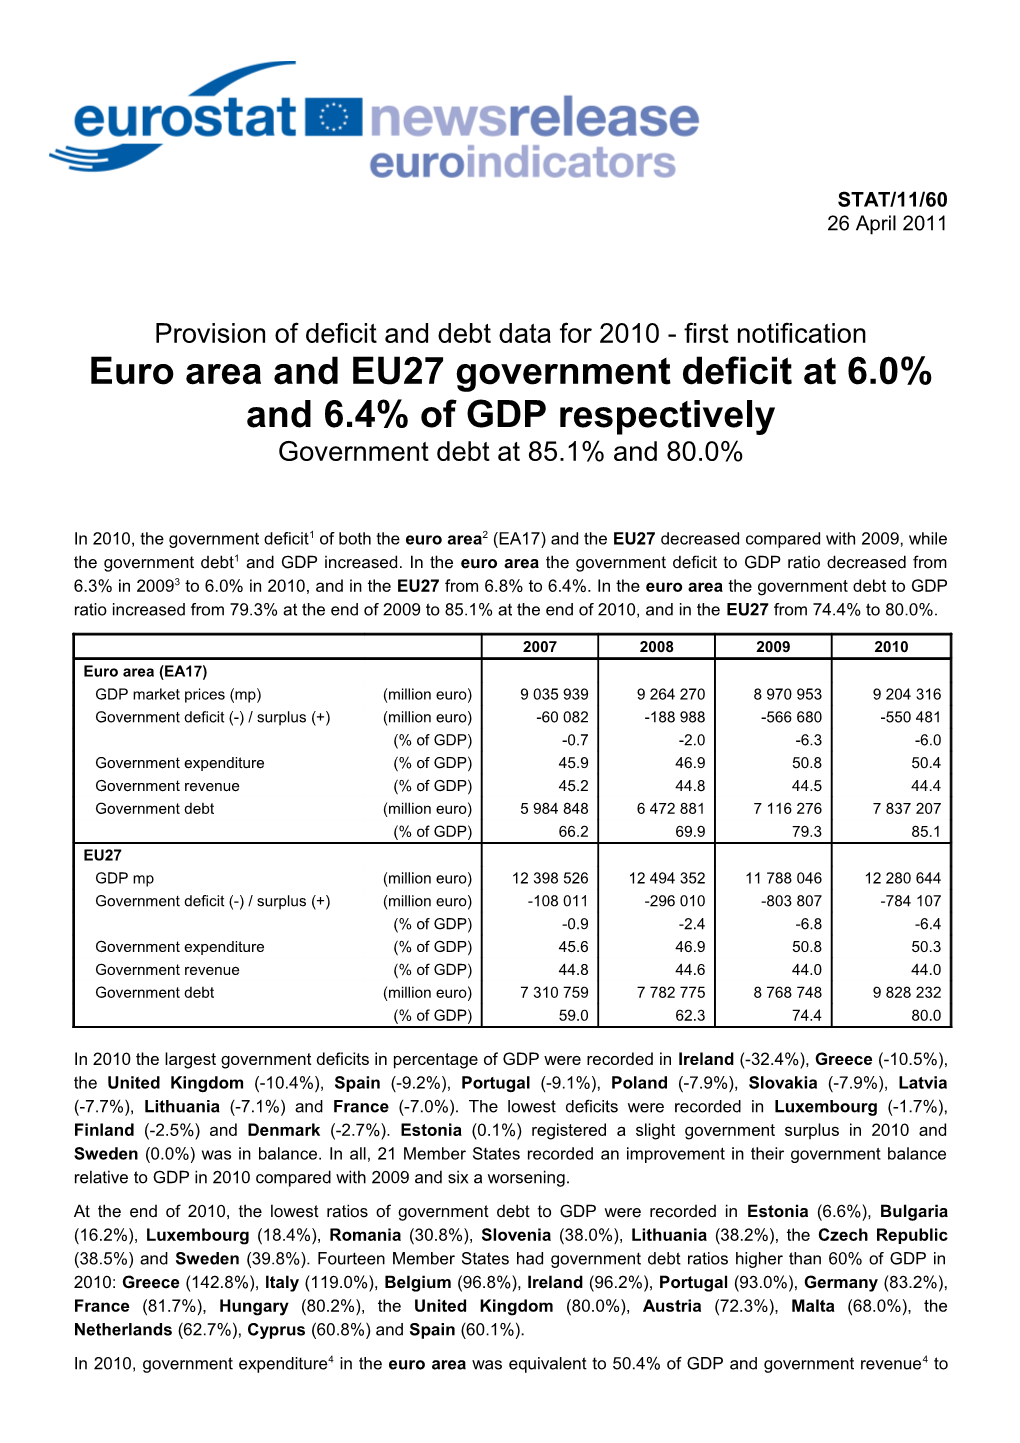 Provision of Deficit and Debt Data for 2010 - First Notification Euro Area and EU27 Government